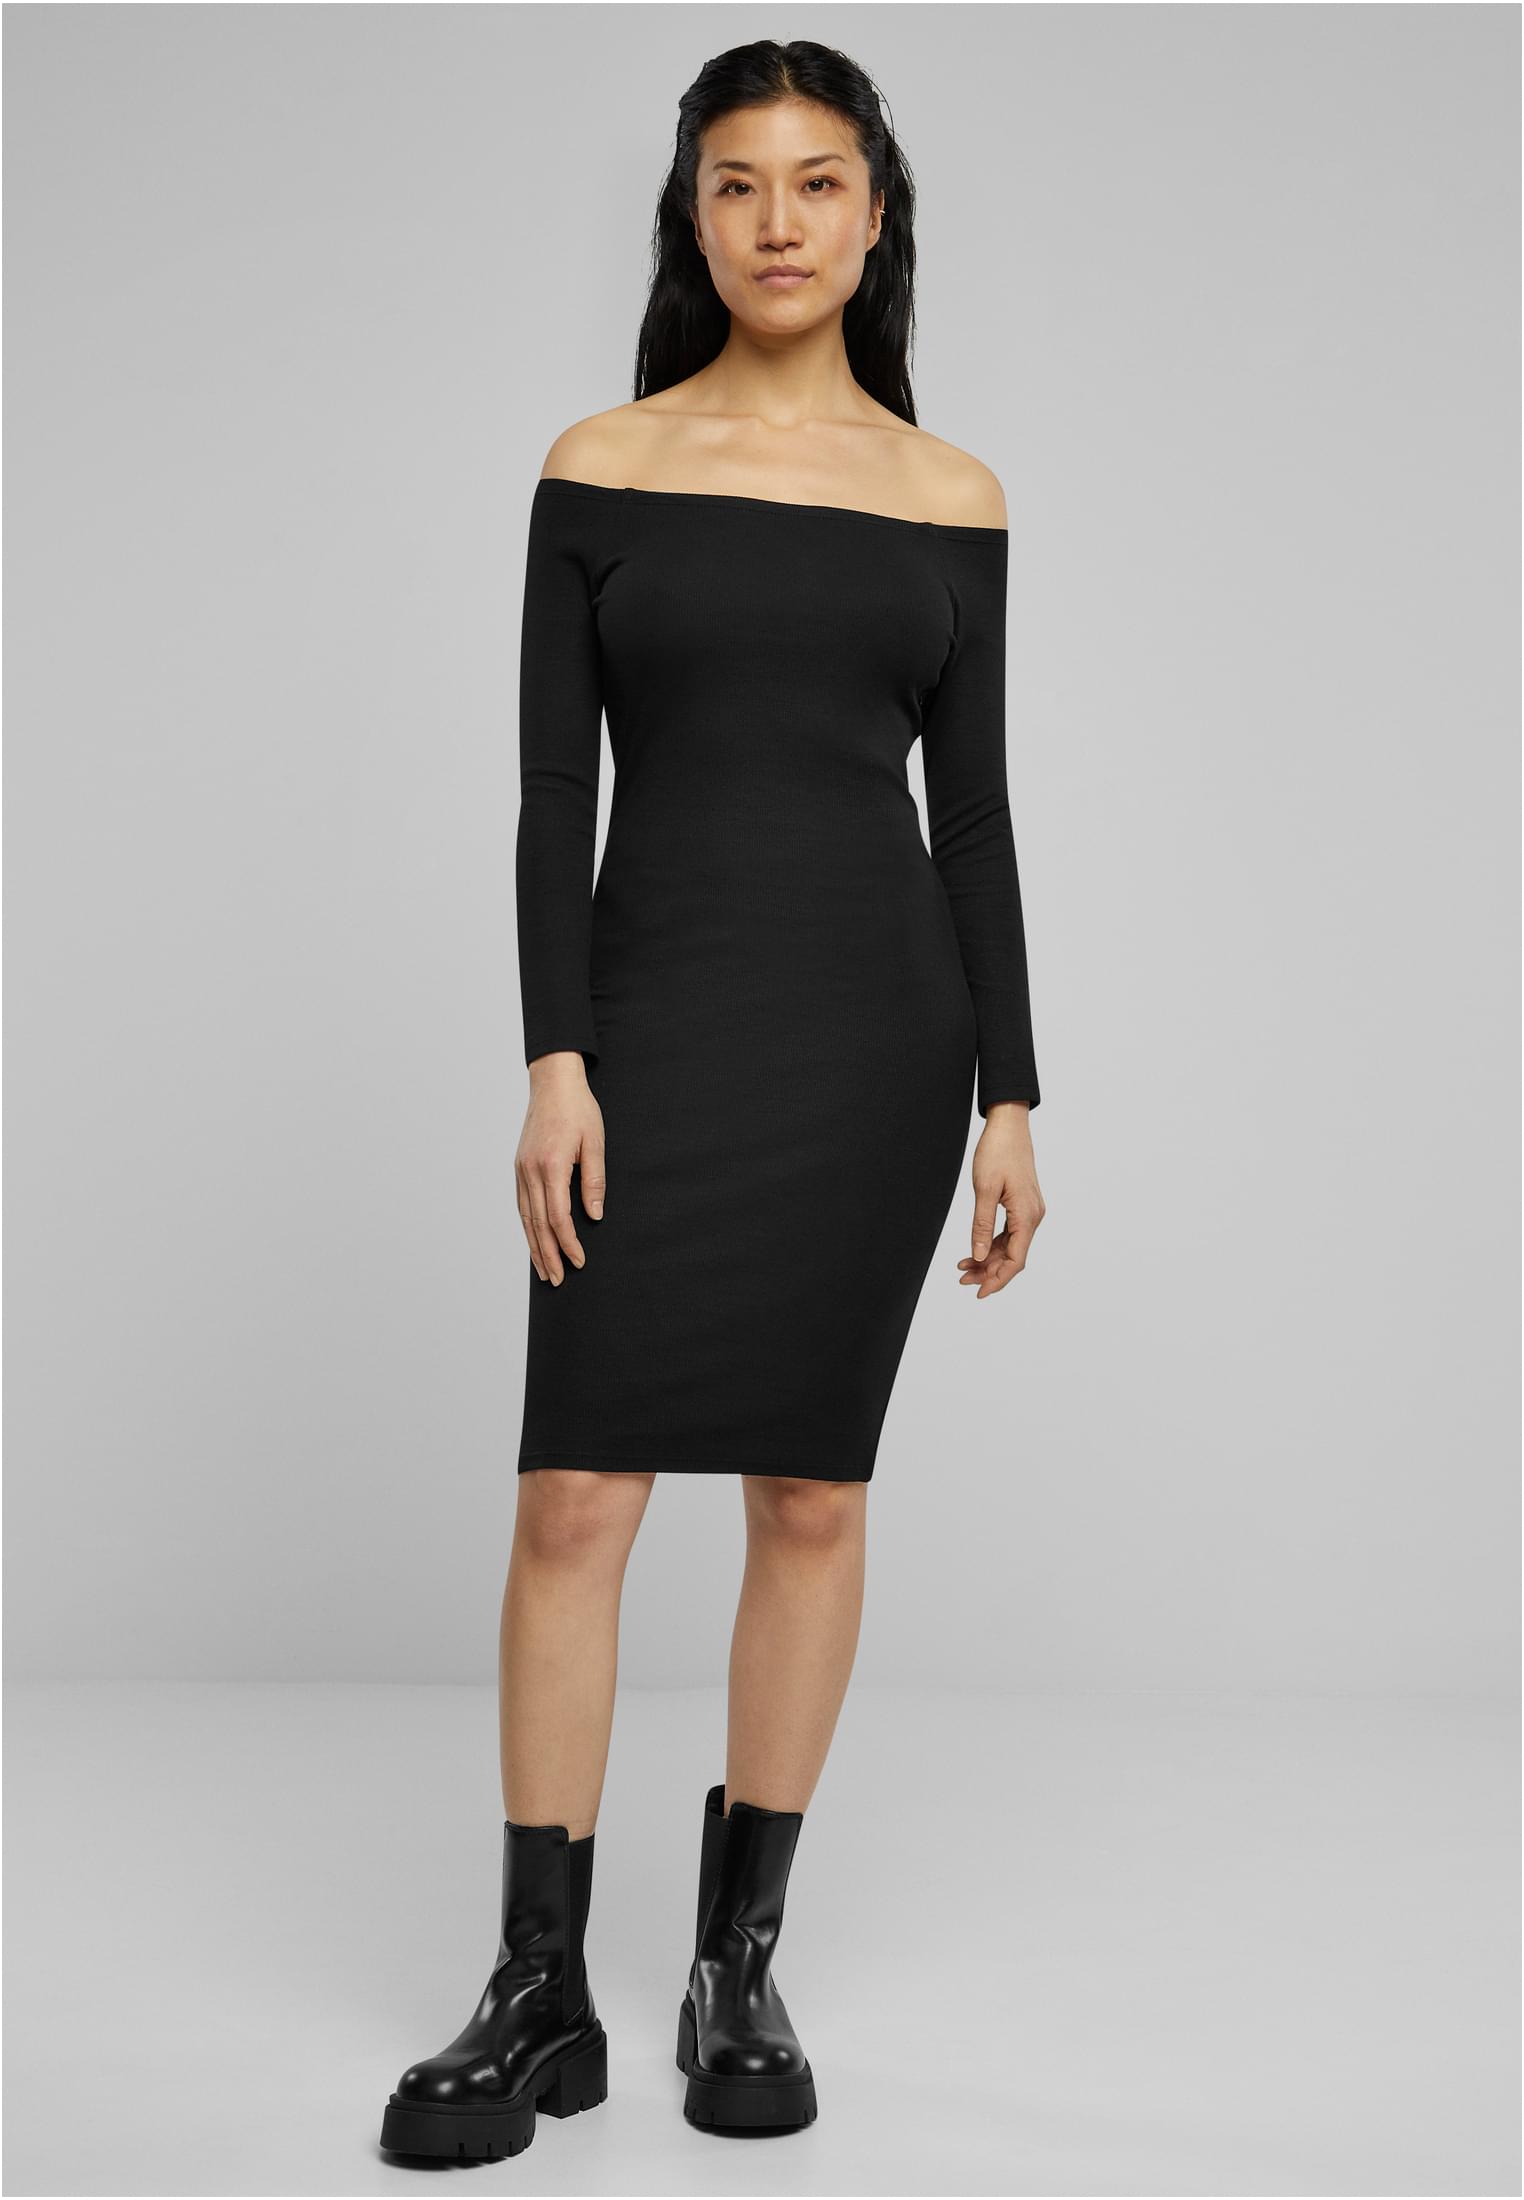 Women's dress with long sleeves and ribs black